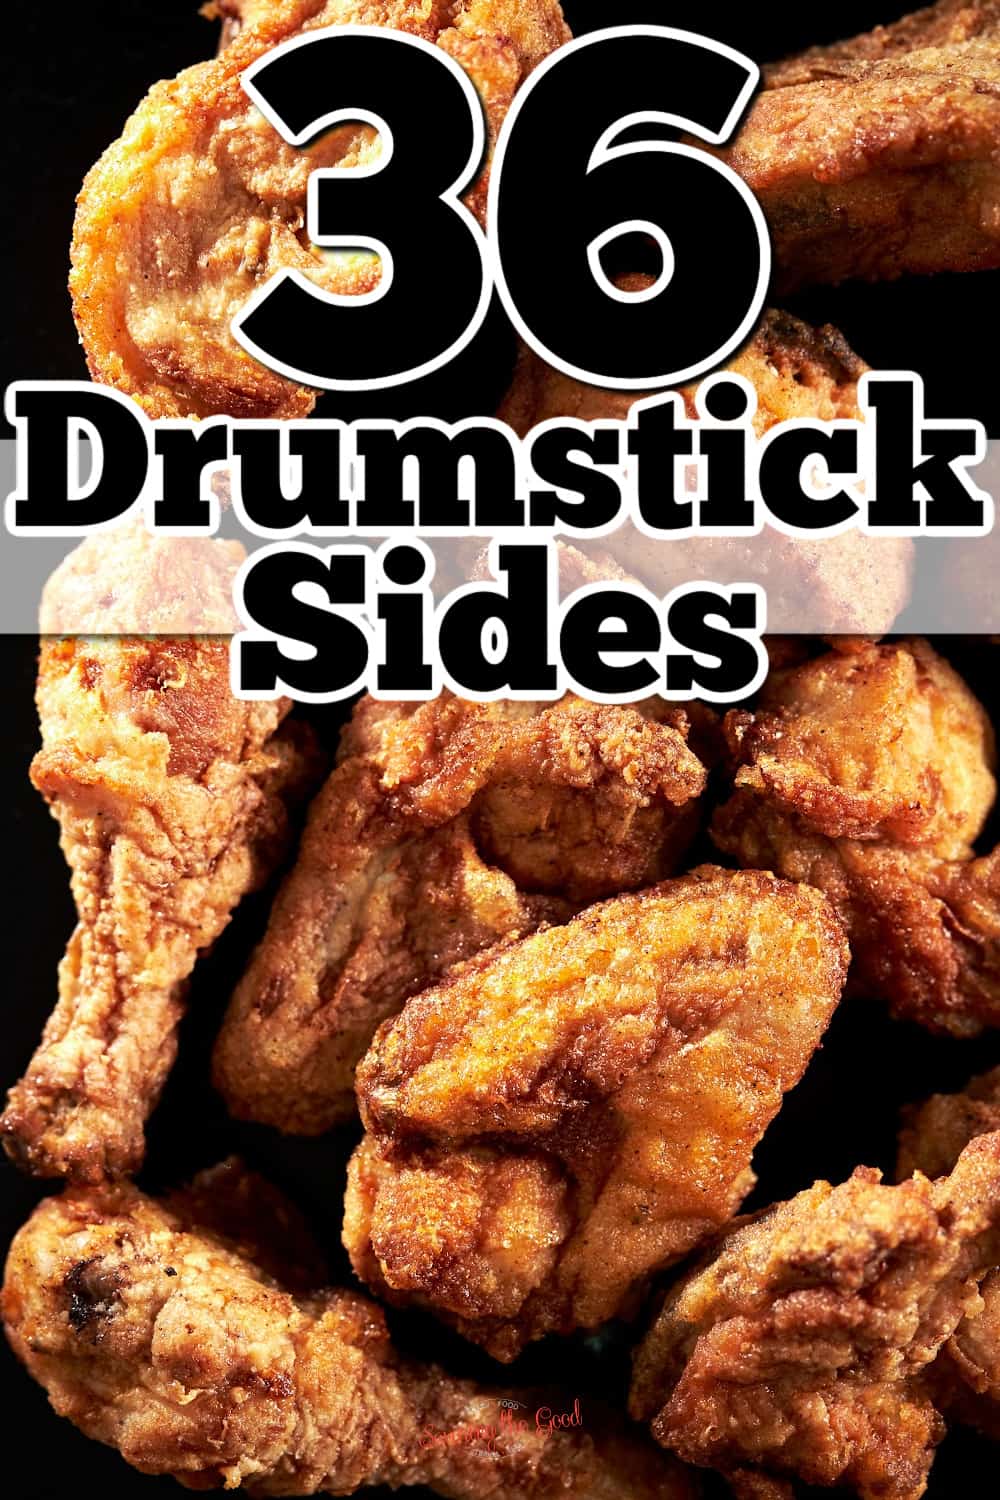 36 drumstick sides. pinterest image with fried chicken and text overlay.